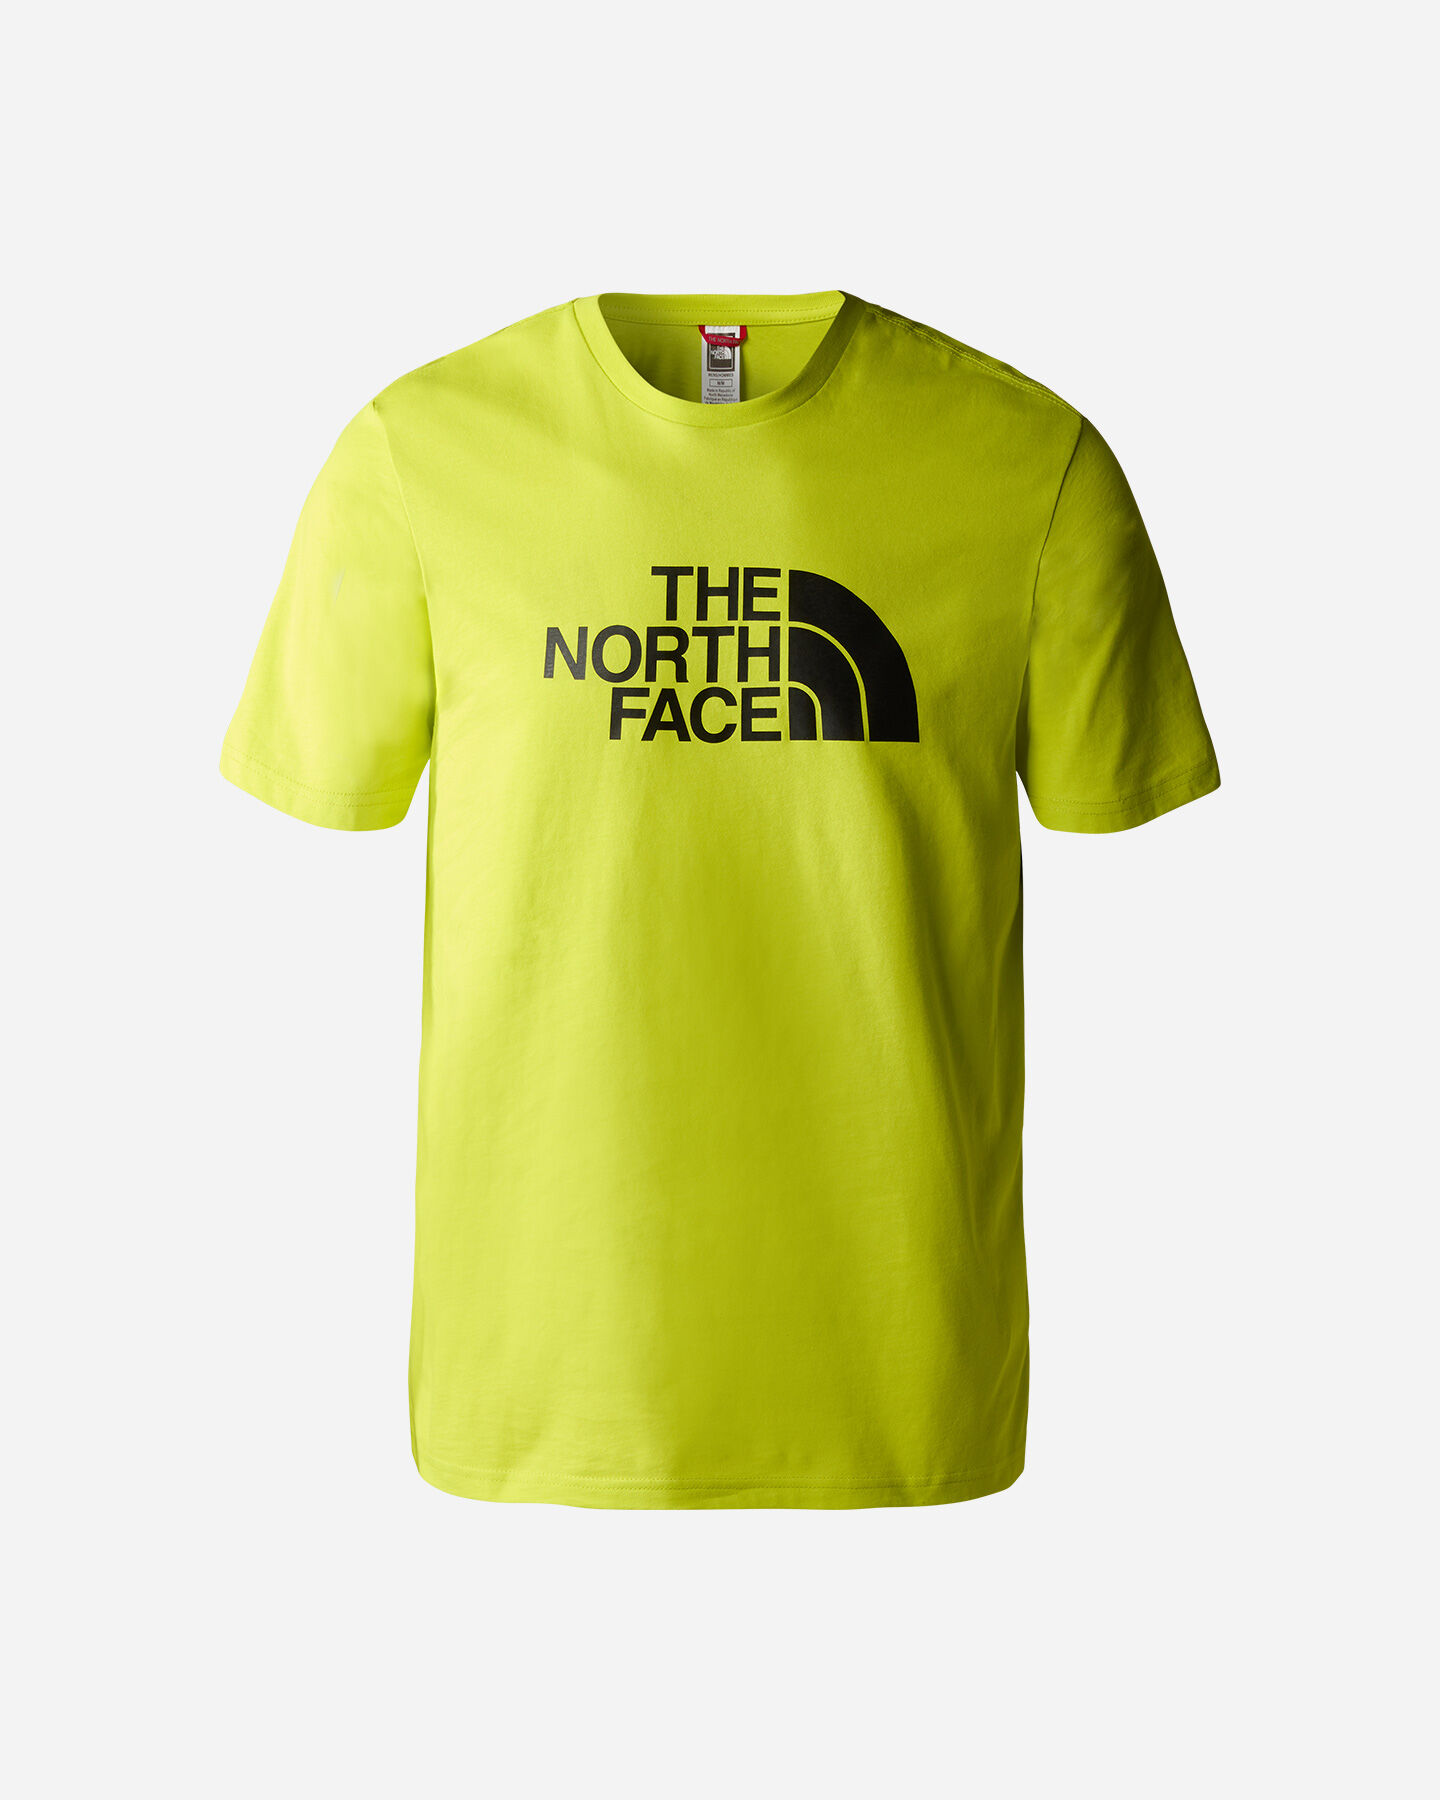  T-Shirt THE NORTH FACE EASY BIG LOGO M S5535605|8NT|S scatto 0